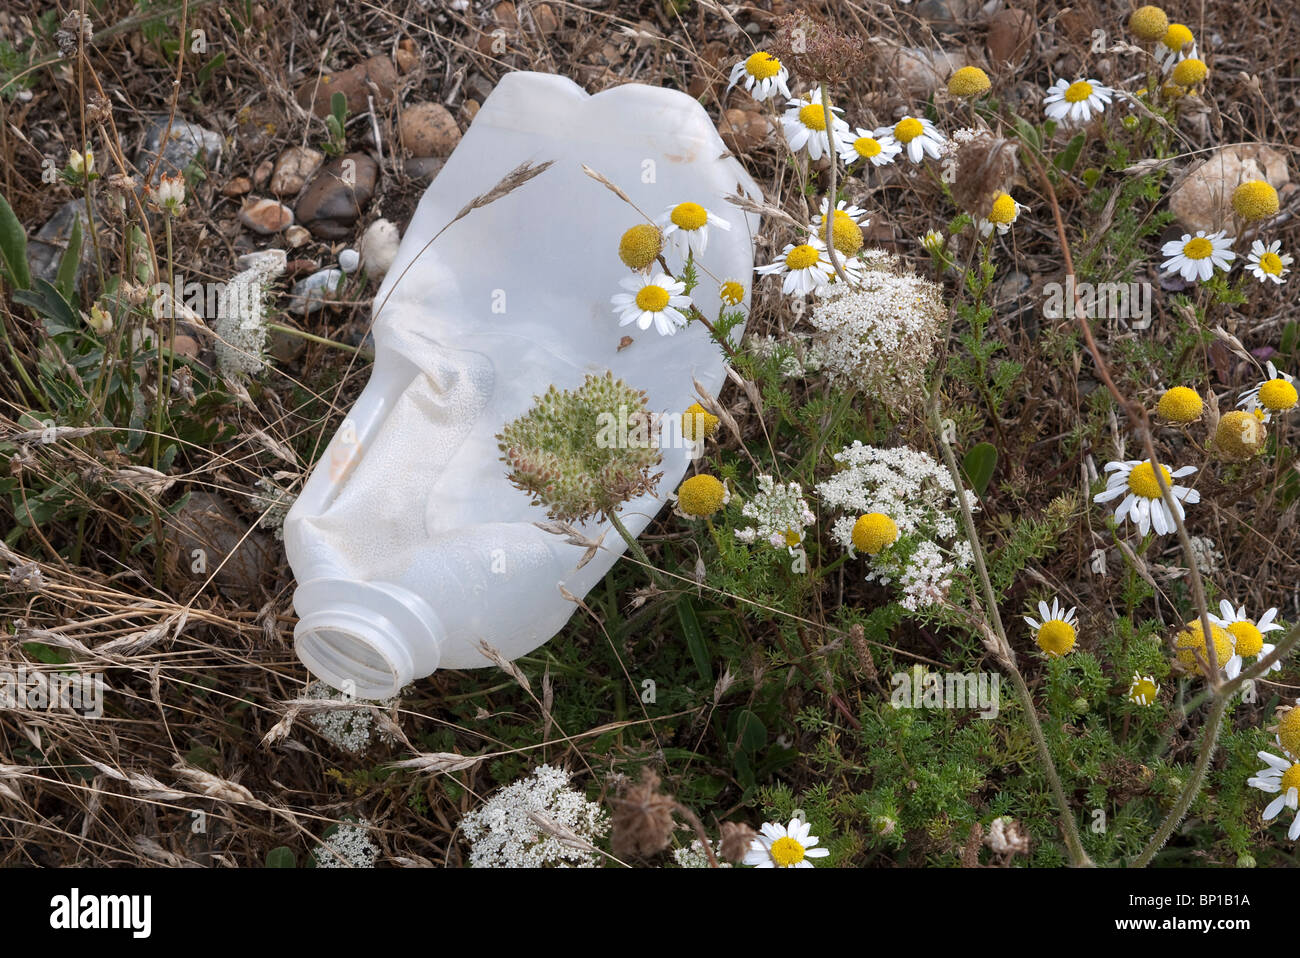 Plastic Milk bottle discarded on an English country footpath Stock Photo